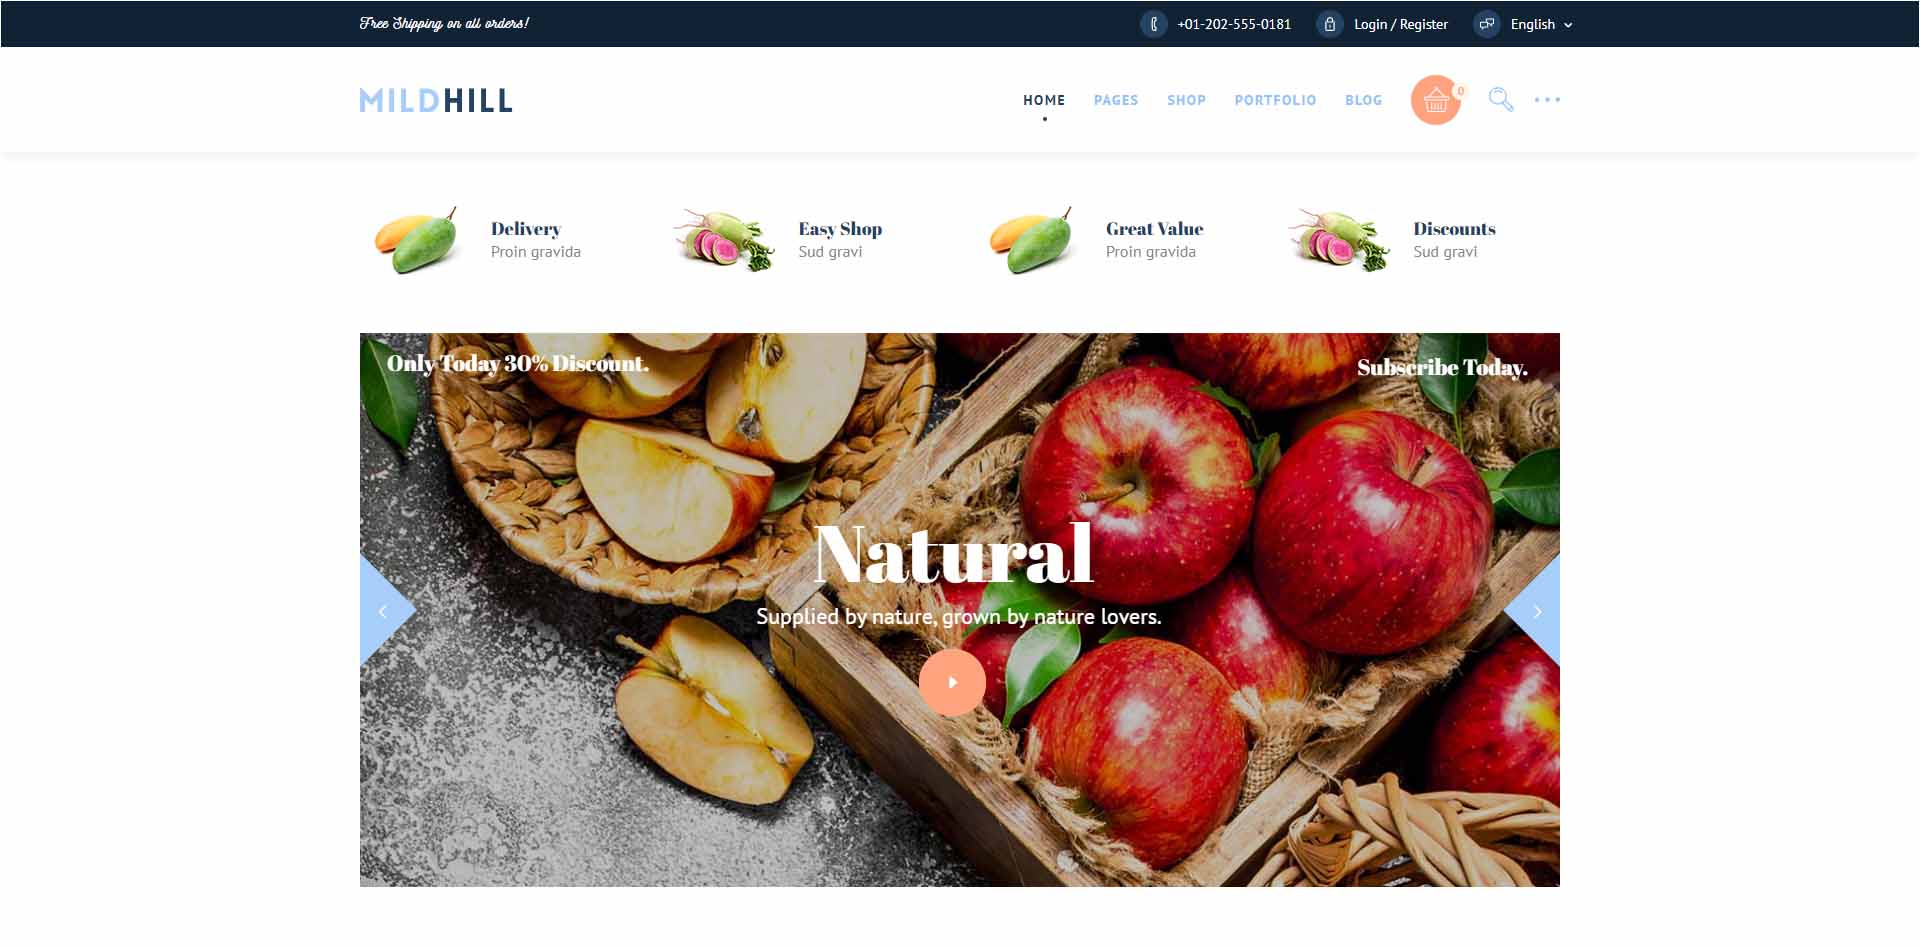 Mildhill Organic and Food Store Theme